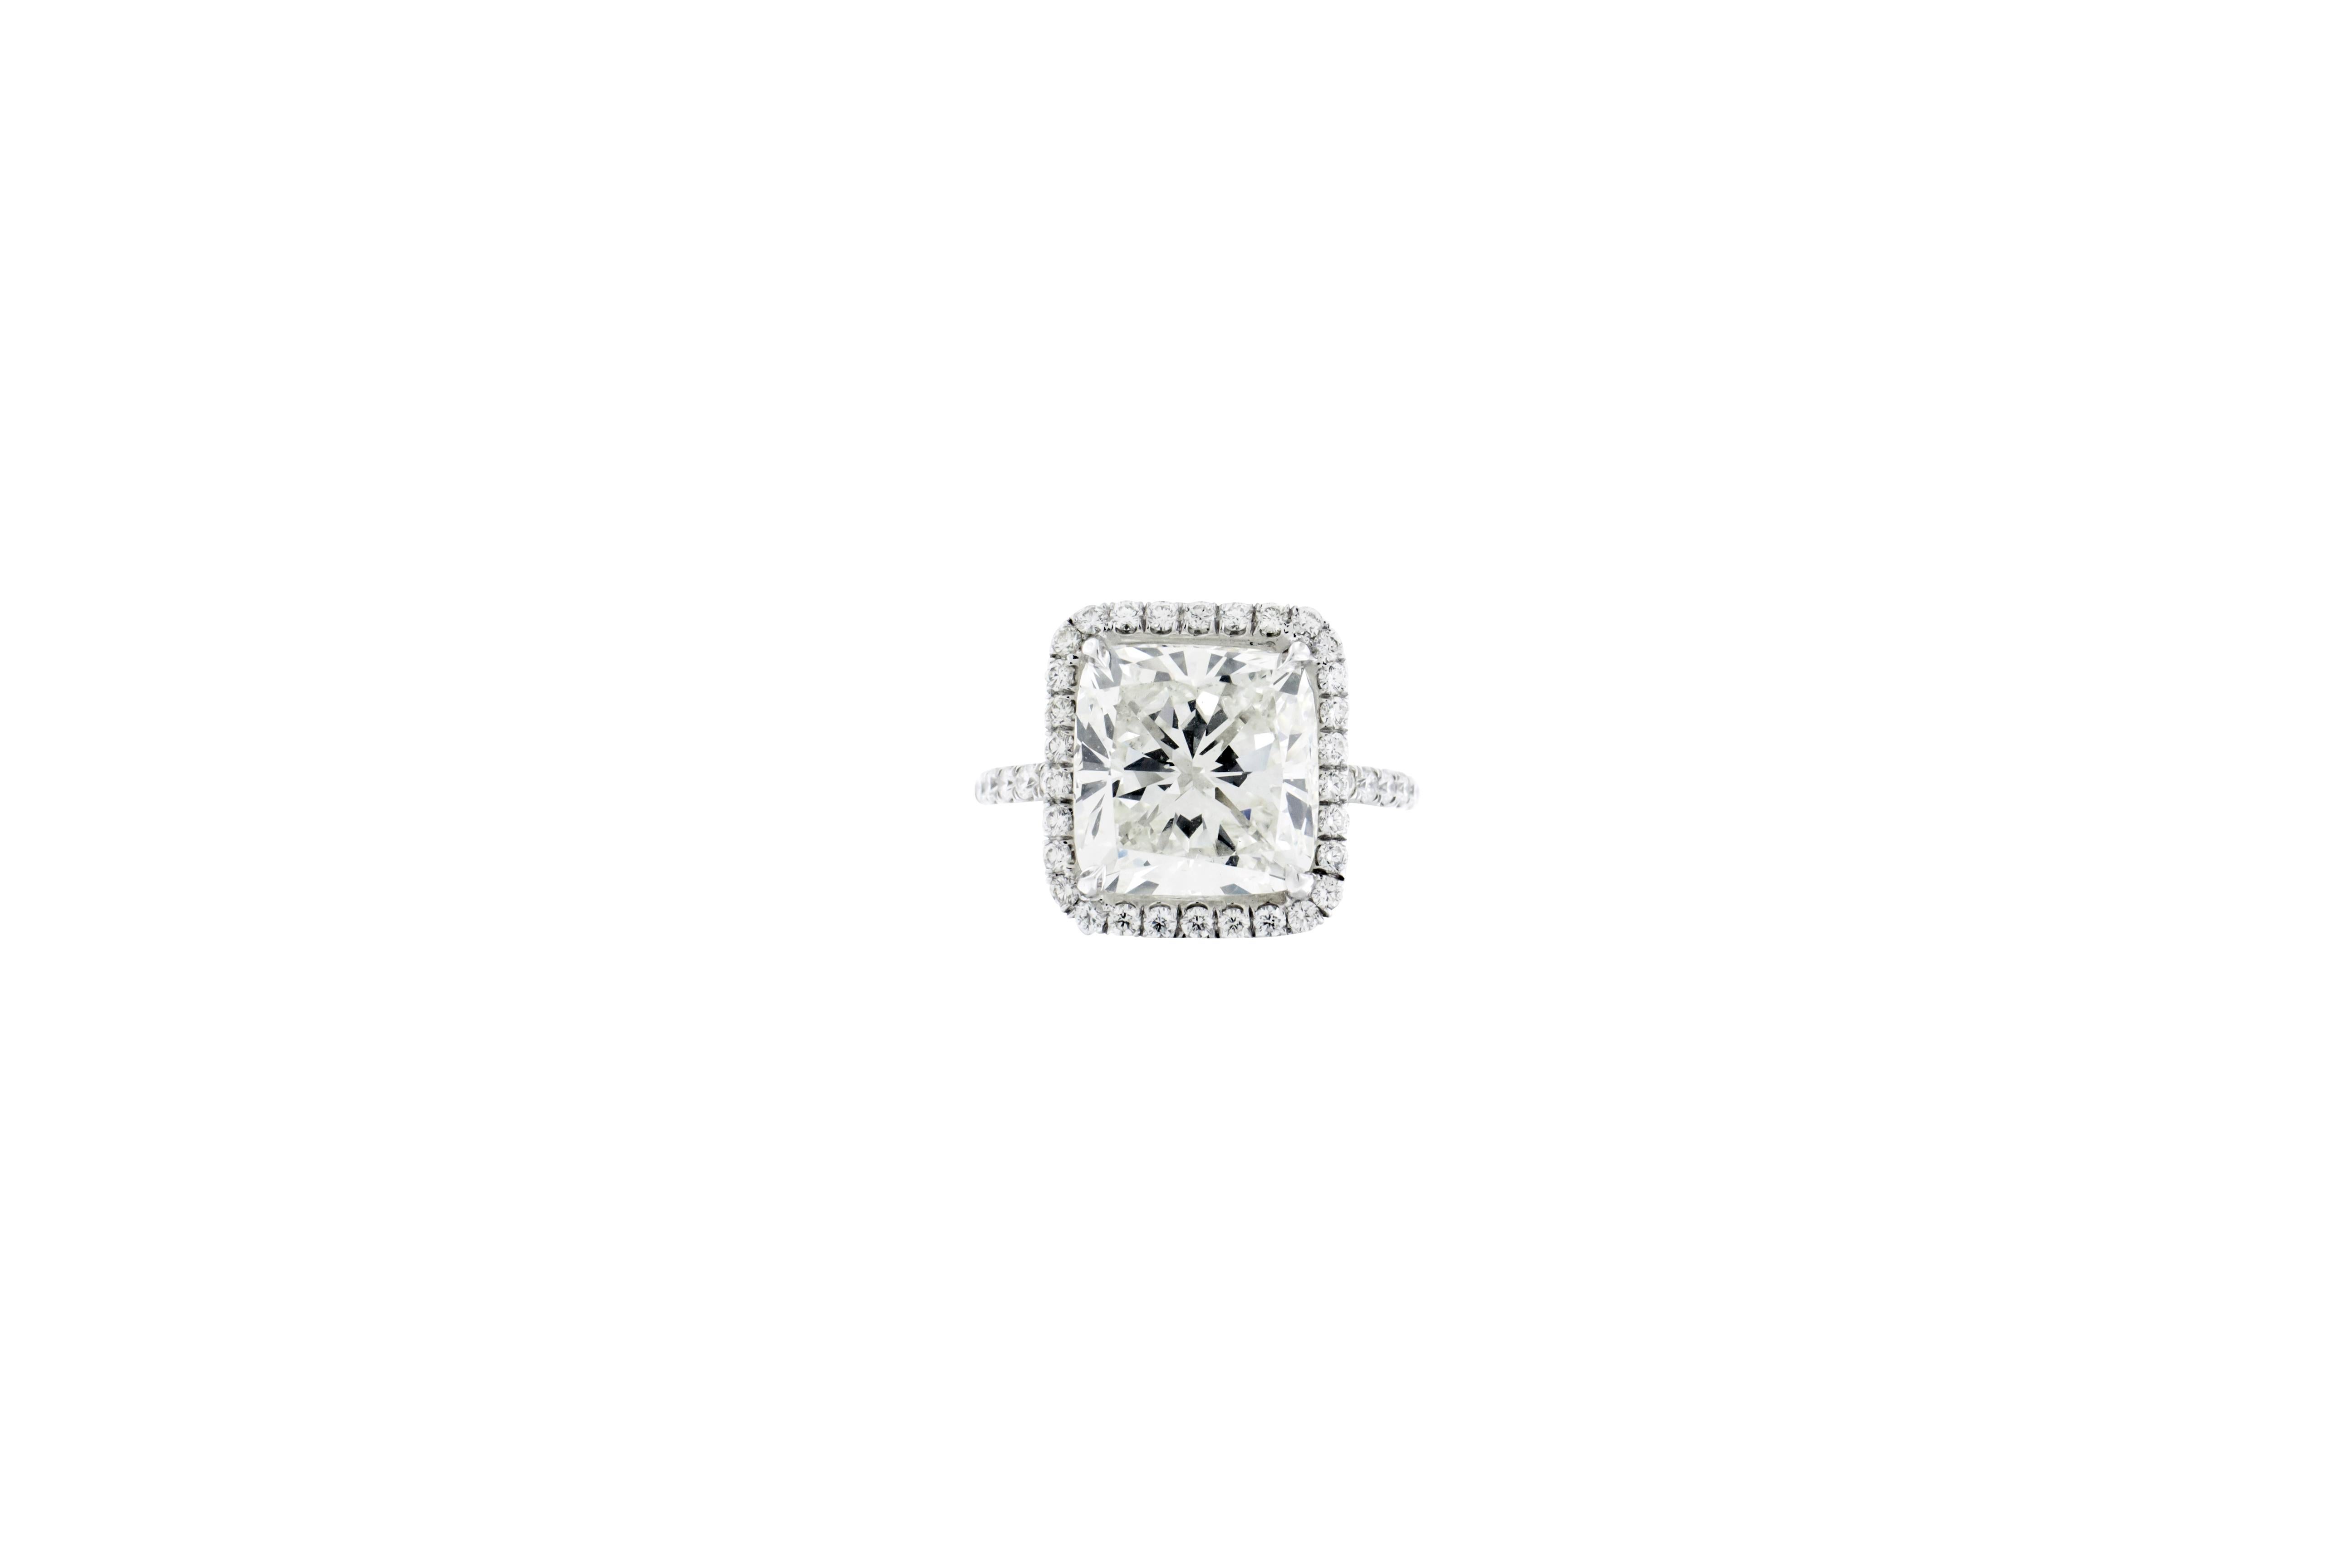 A 7.06 modified brilliant cushion cut diamond, K VS2,  set in platinum and 18K white gold with a micro-pave halo of diamonds G-H color VS-SI. Setting has a total of 30 stones. GIA certified. Certificate No. 1136243398. Size 7 1/4.

Resizing